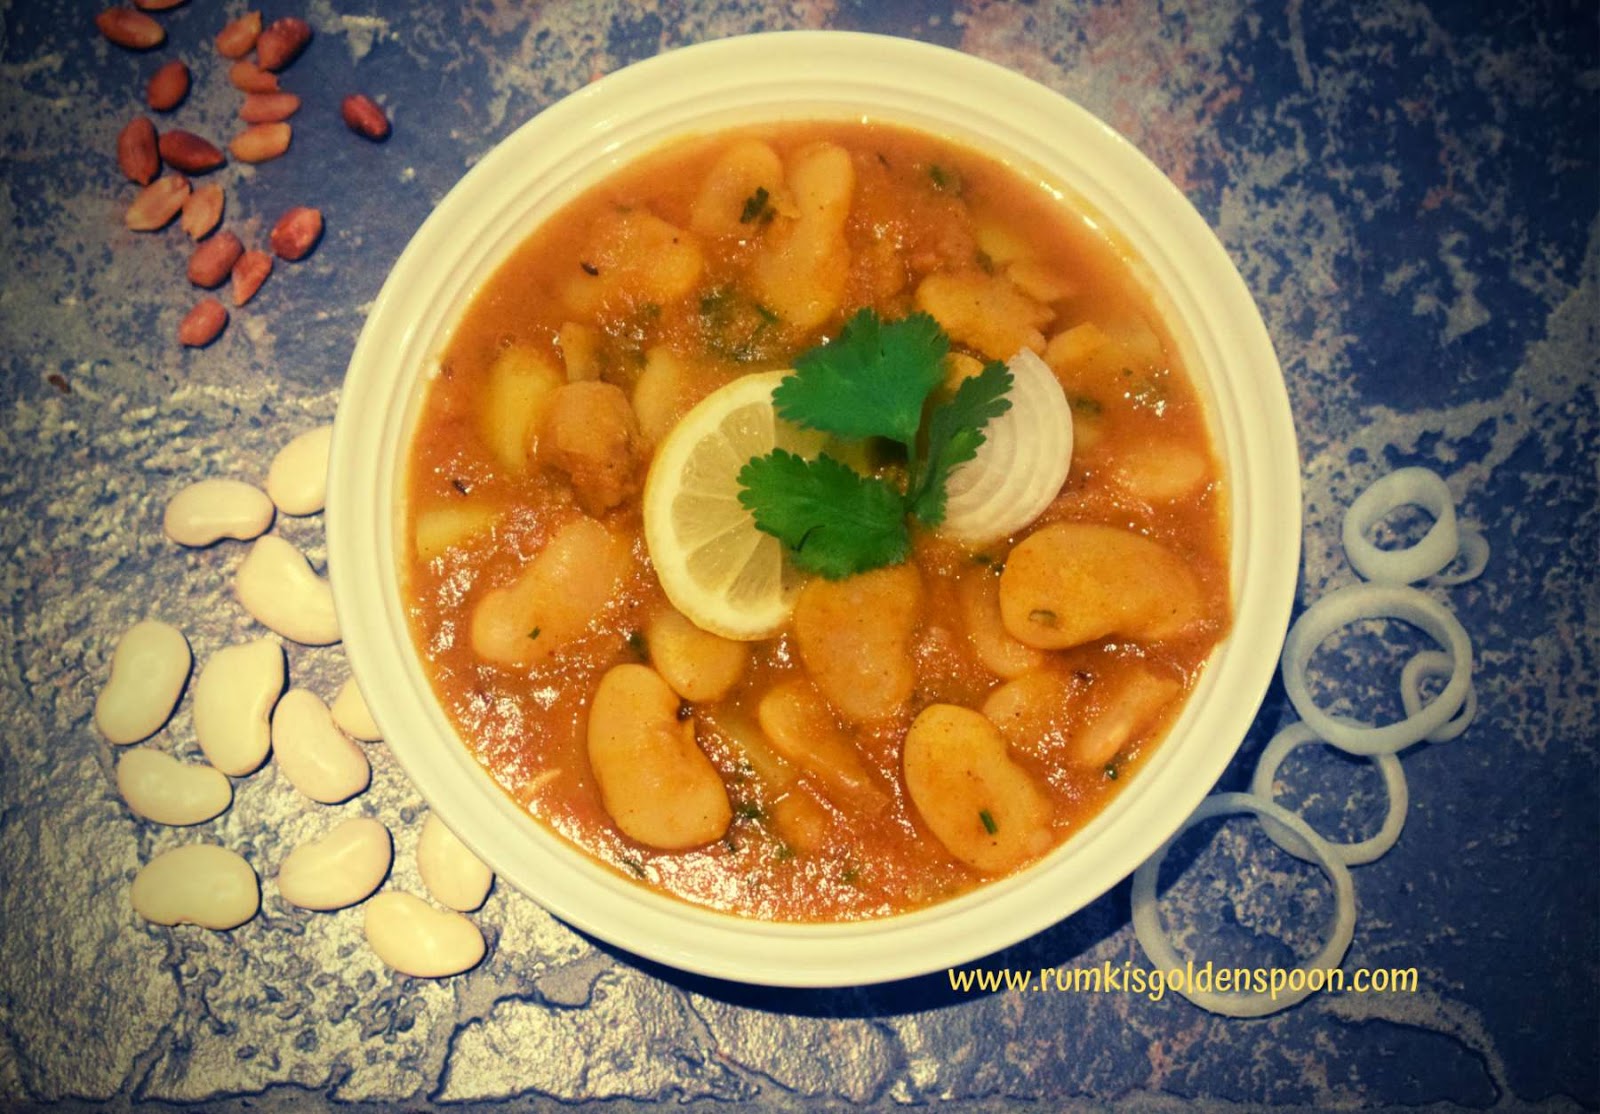 Indian recipe, Vegetarian, Vegan, Spicy Butter Beans Curry, Rajma, Rumki's Golden Spoon, Masala Curry, Quick and Easy